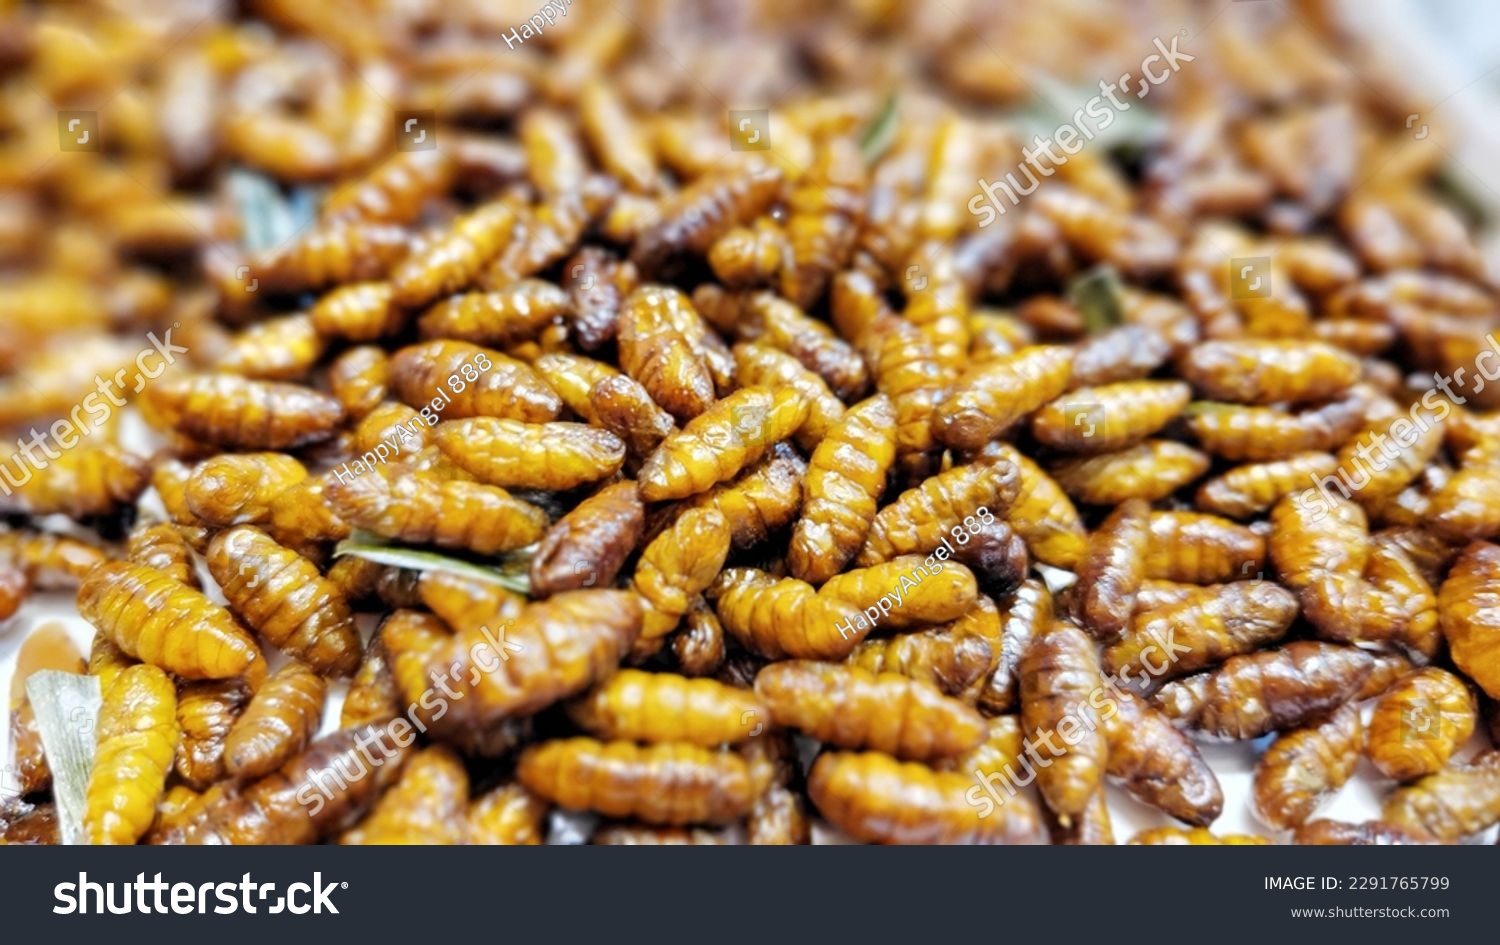 Pupa, Silkworm fried food, fried insect in Asia, Thailand. Thai street street food  #2291765799